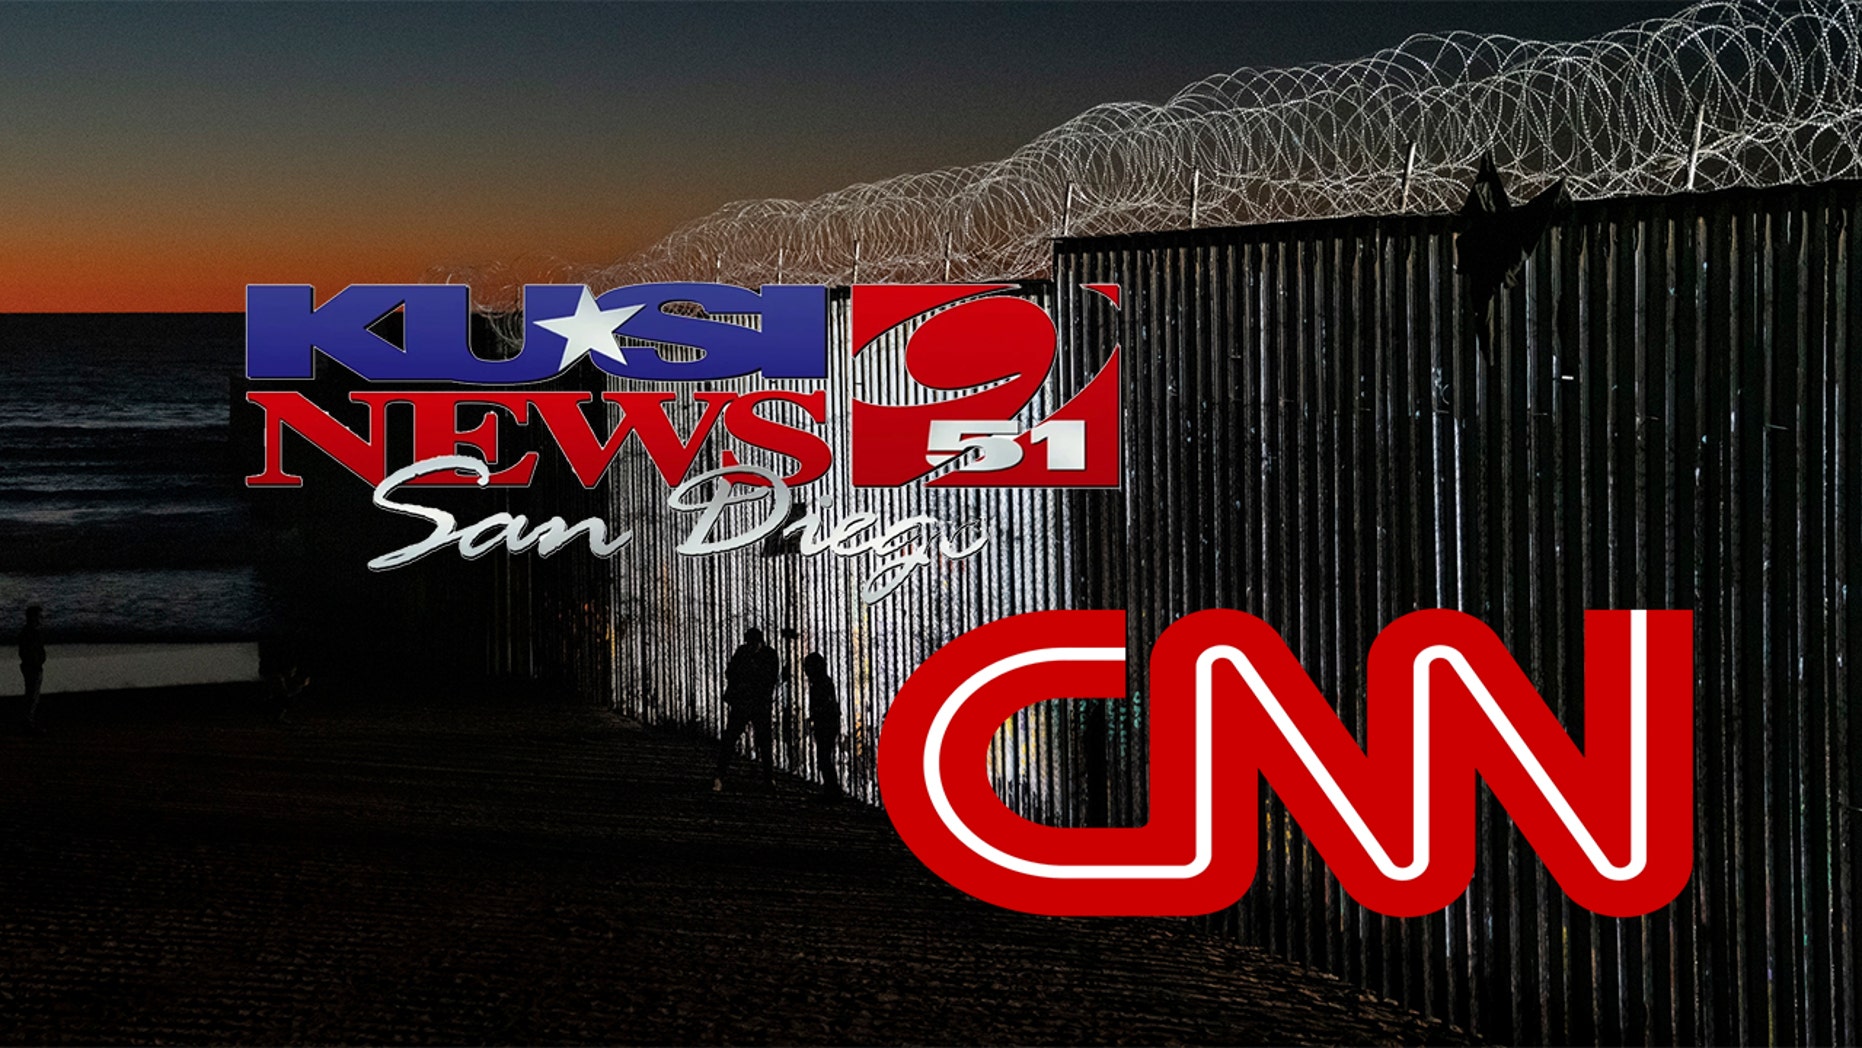 San Diego station claims CNN asked for local border wall perspective, but backed off when response favored Trump